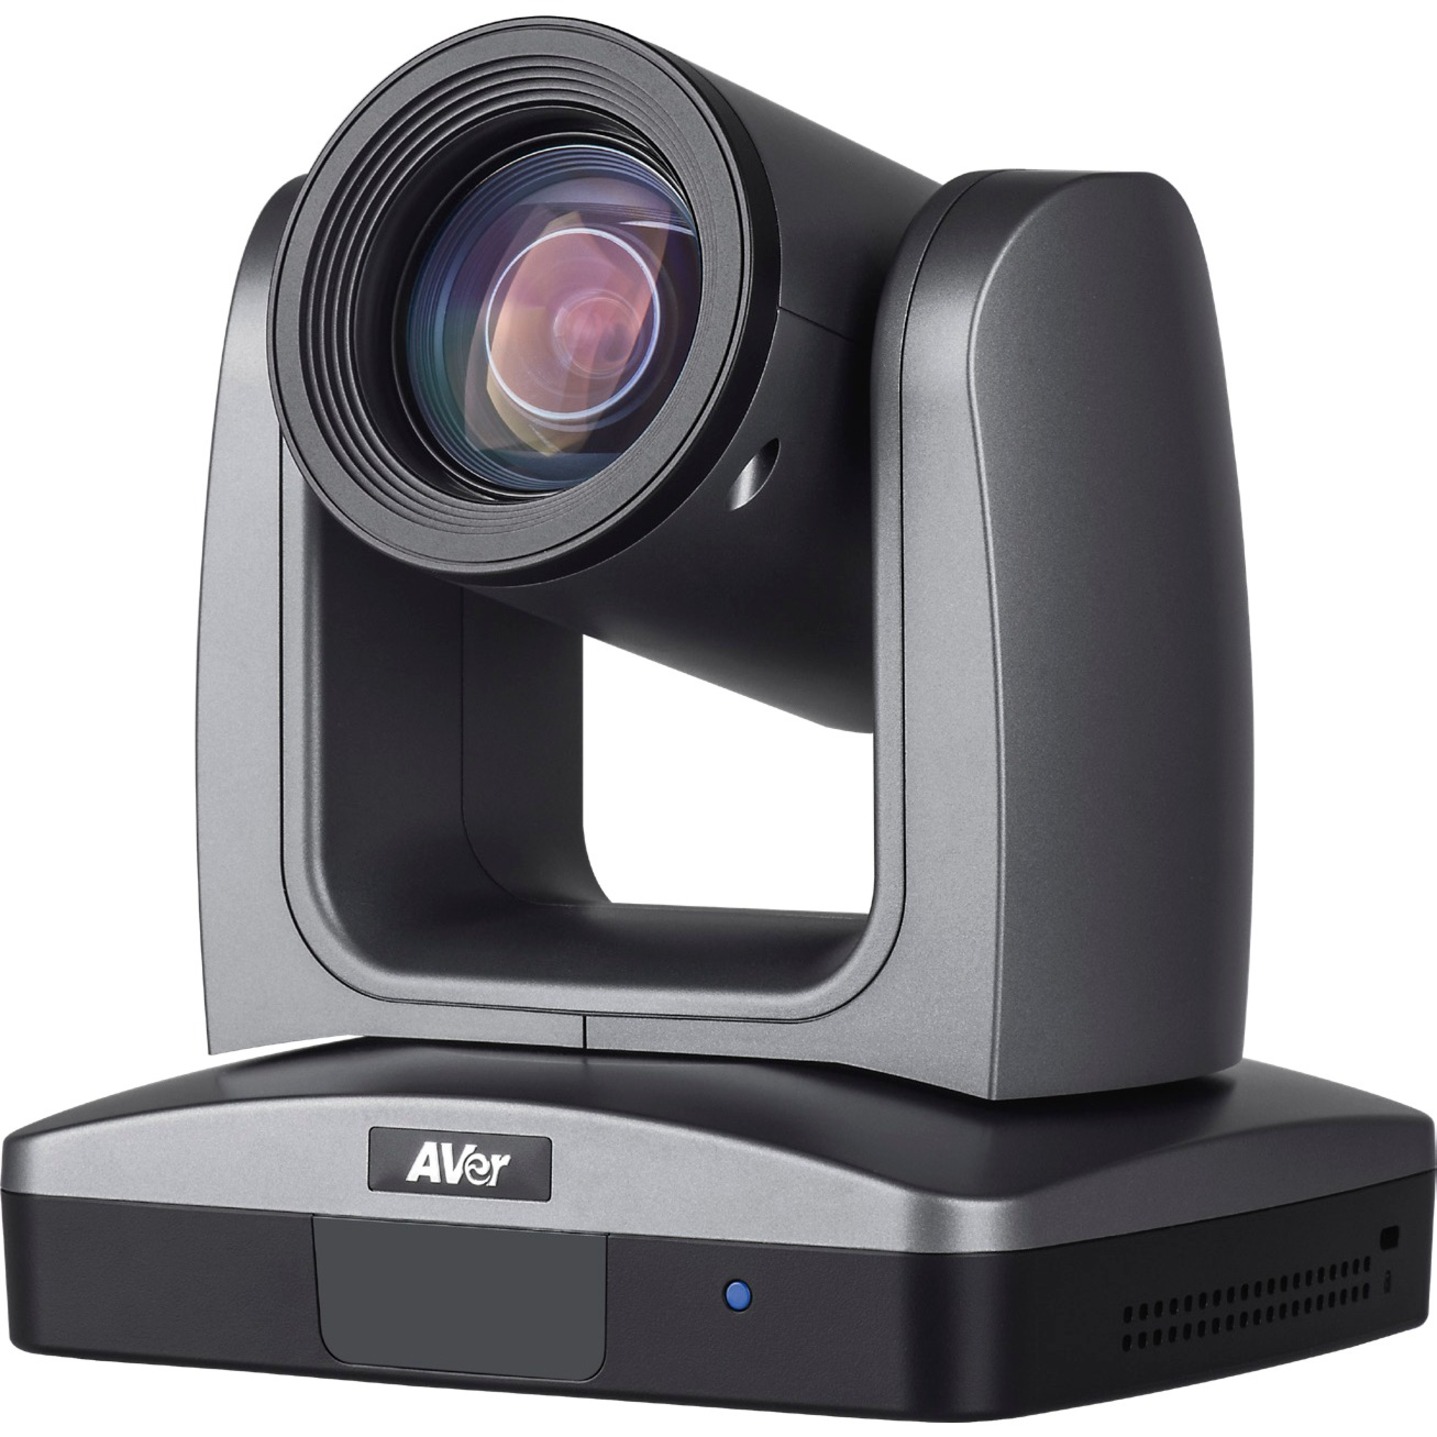 AVer PTZ310 Video Conferencing Camera, 2.1 Megapixel, 60 fps, Gray, USB 2.0, TAA Compliant - image 1 of 6